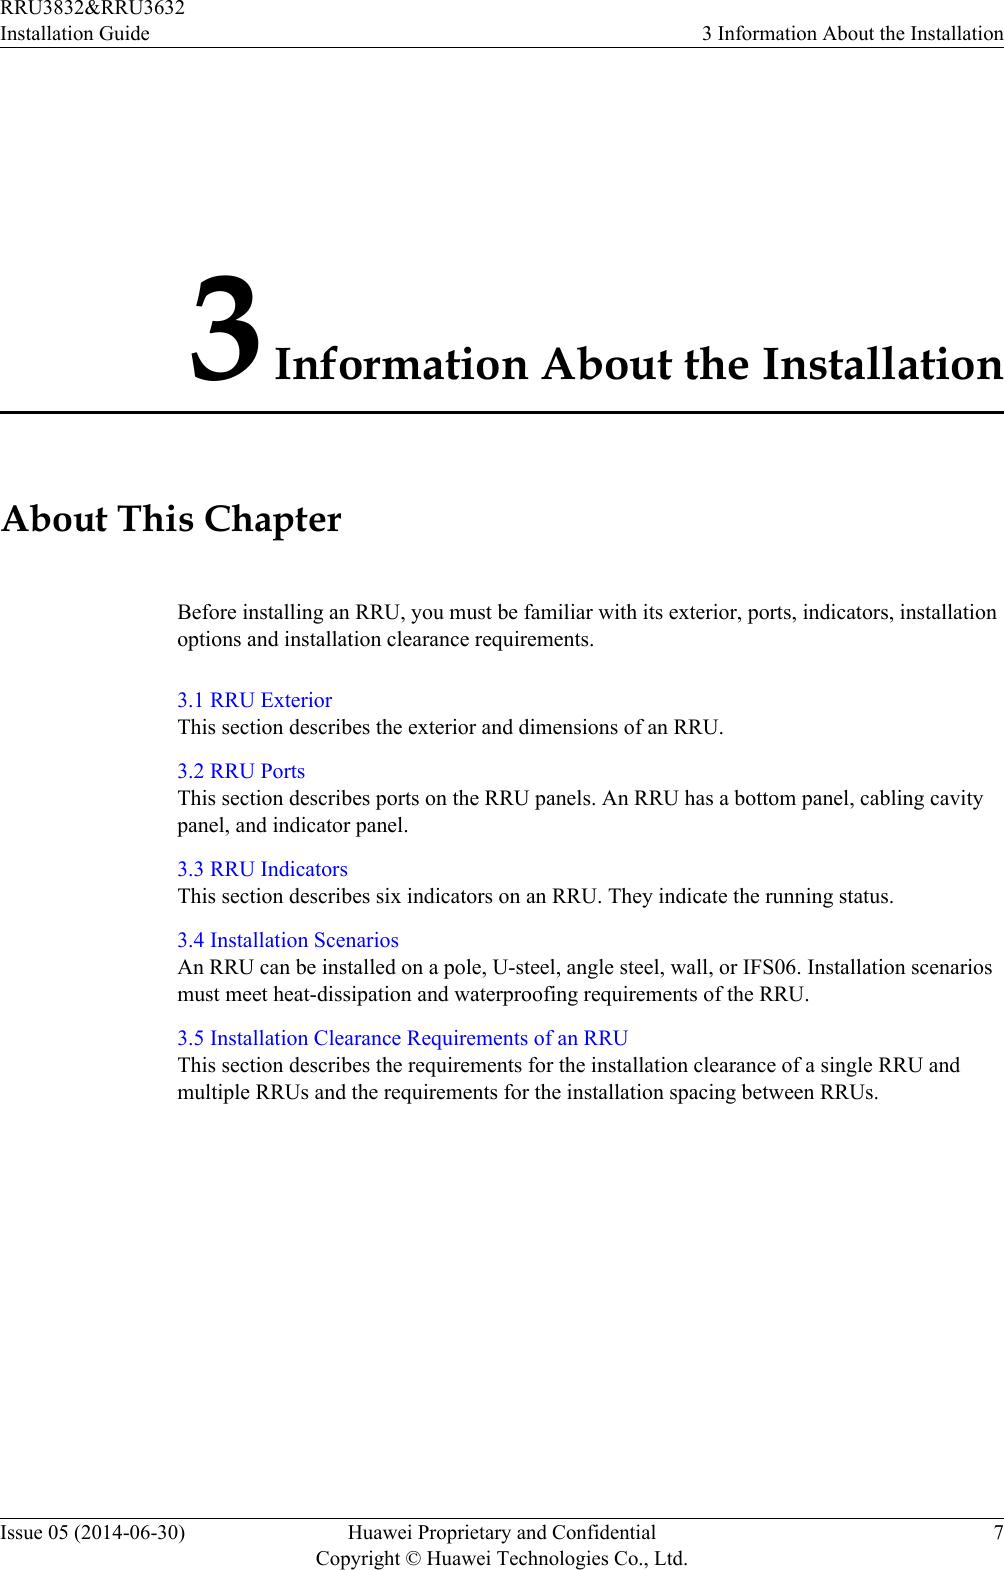 3 Information About the InstallationAbout This ChapterBefore installing an RRU, you must be familiar with its exterior, ports, indicators, installationoptions and installation clearance requirements.3.1 RRU ExteriorThis section describes the exterior and dimensions of an RRU.3.2 RRU PortsThis section describes ports on the RRU panels. An RRU has a bottom panel, cabling cavitypanel, and indicator panel.3.3 RRU IndicatorsThis section describes six indicators on an RRU. They indicate the running status.3.4 Installation ScenariosAn RRU can be installed on a pole, U-steel, angle steel, wall, or IFS06. Installation scenariosmust meet heat-dissipation and waterproofing requirements of the RRU.3.5 Installation Clearance Requirements of an RRUThis section describes the requirements for the installation clearance of a single RRU andmultiple RRUs and the requirements for the installation spacing between RRUs.RRU3832&amp;RRU3632Installation Guide 3 Information About the InstallationIssue 05 (2014-06-30) Huawei Proprietary and ConfidentialCopyright © Huawei Technologies Co., Ltd.7